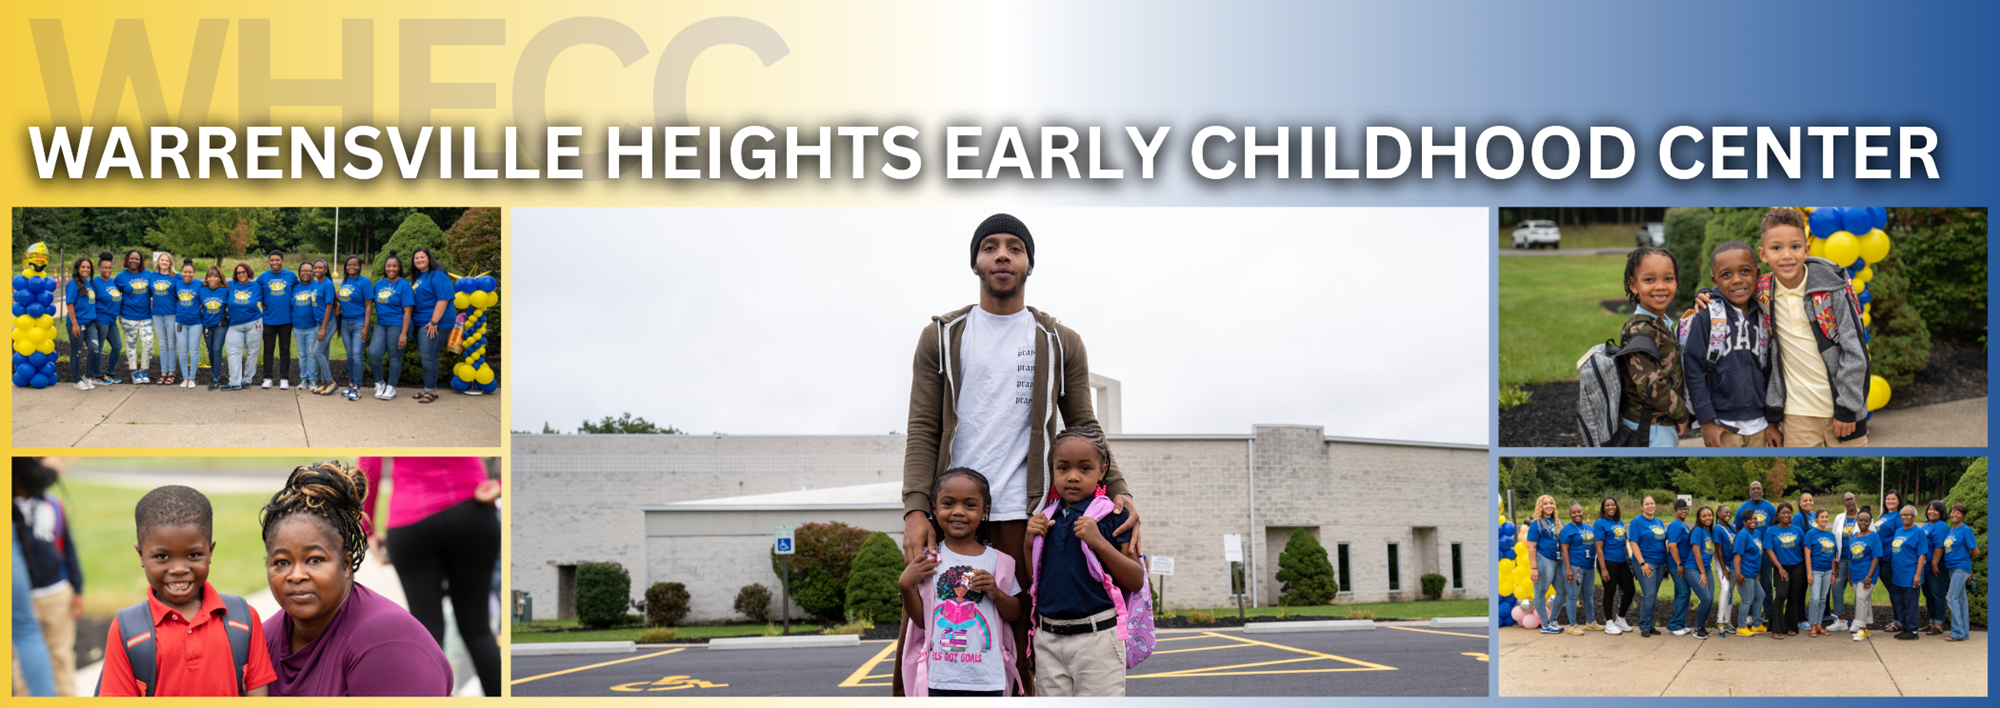 Warrensville Heights Early Childhood Center